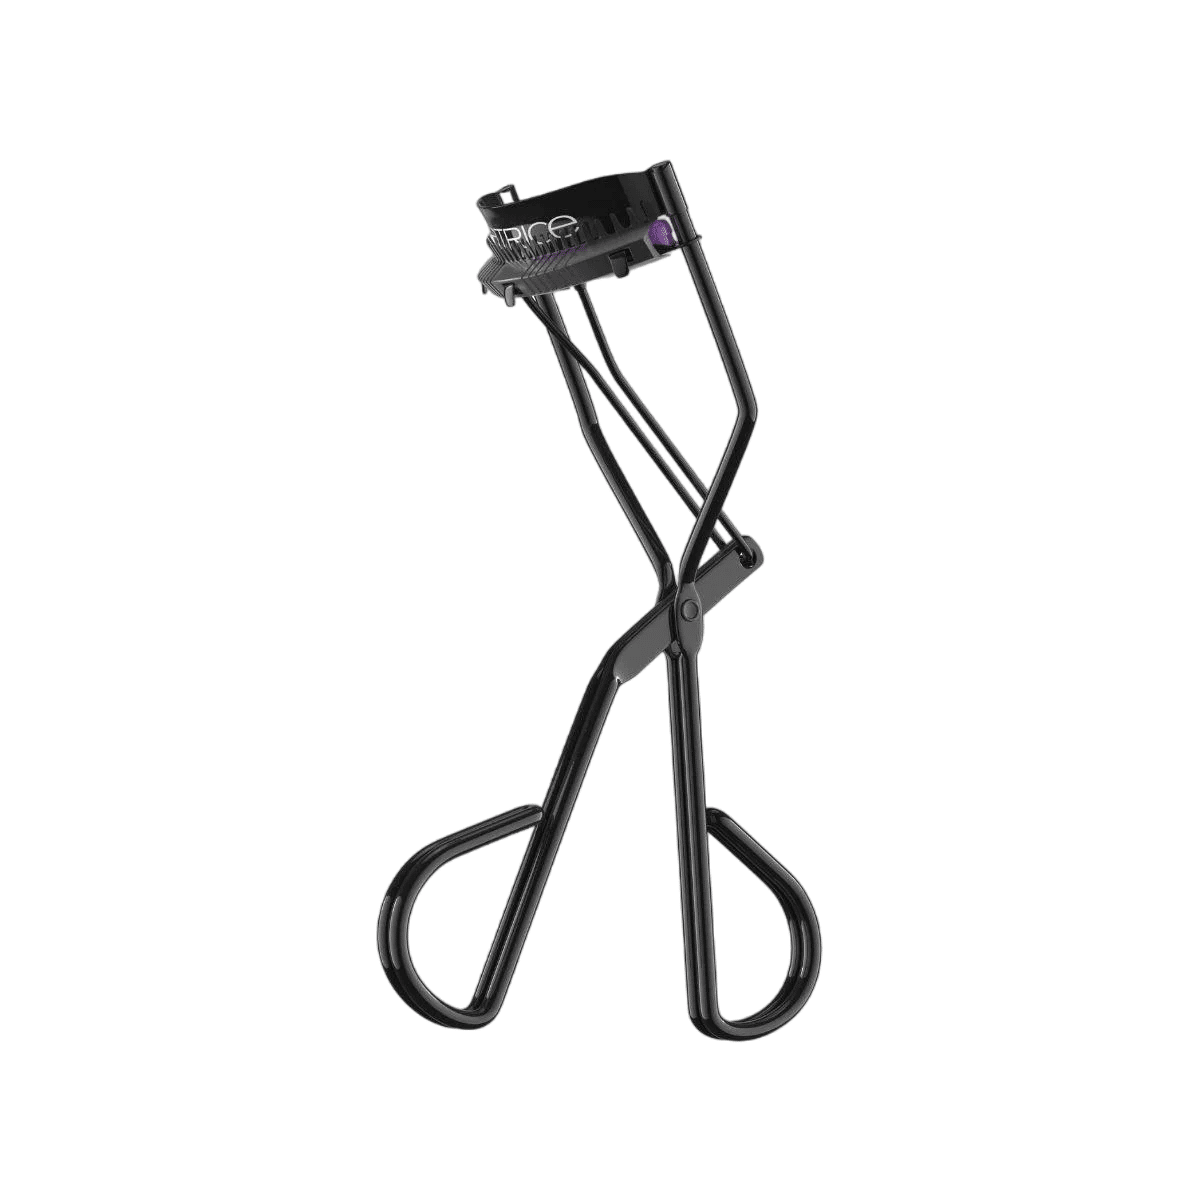 A Catrice - Lash Curler on a white background.